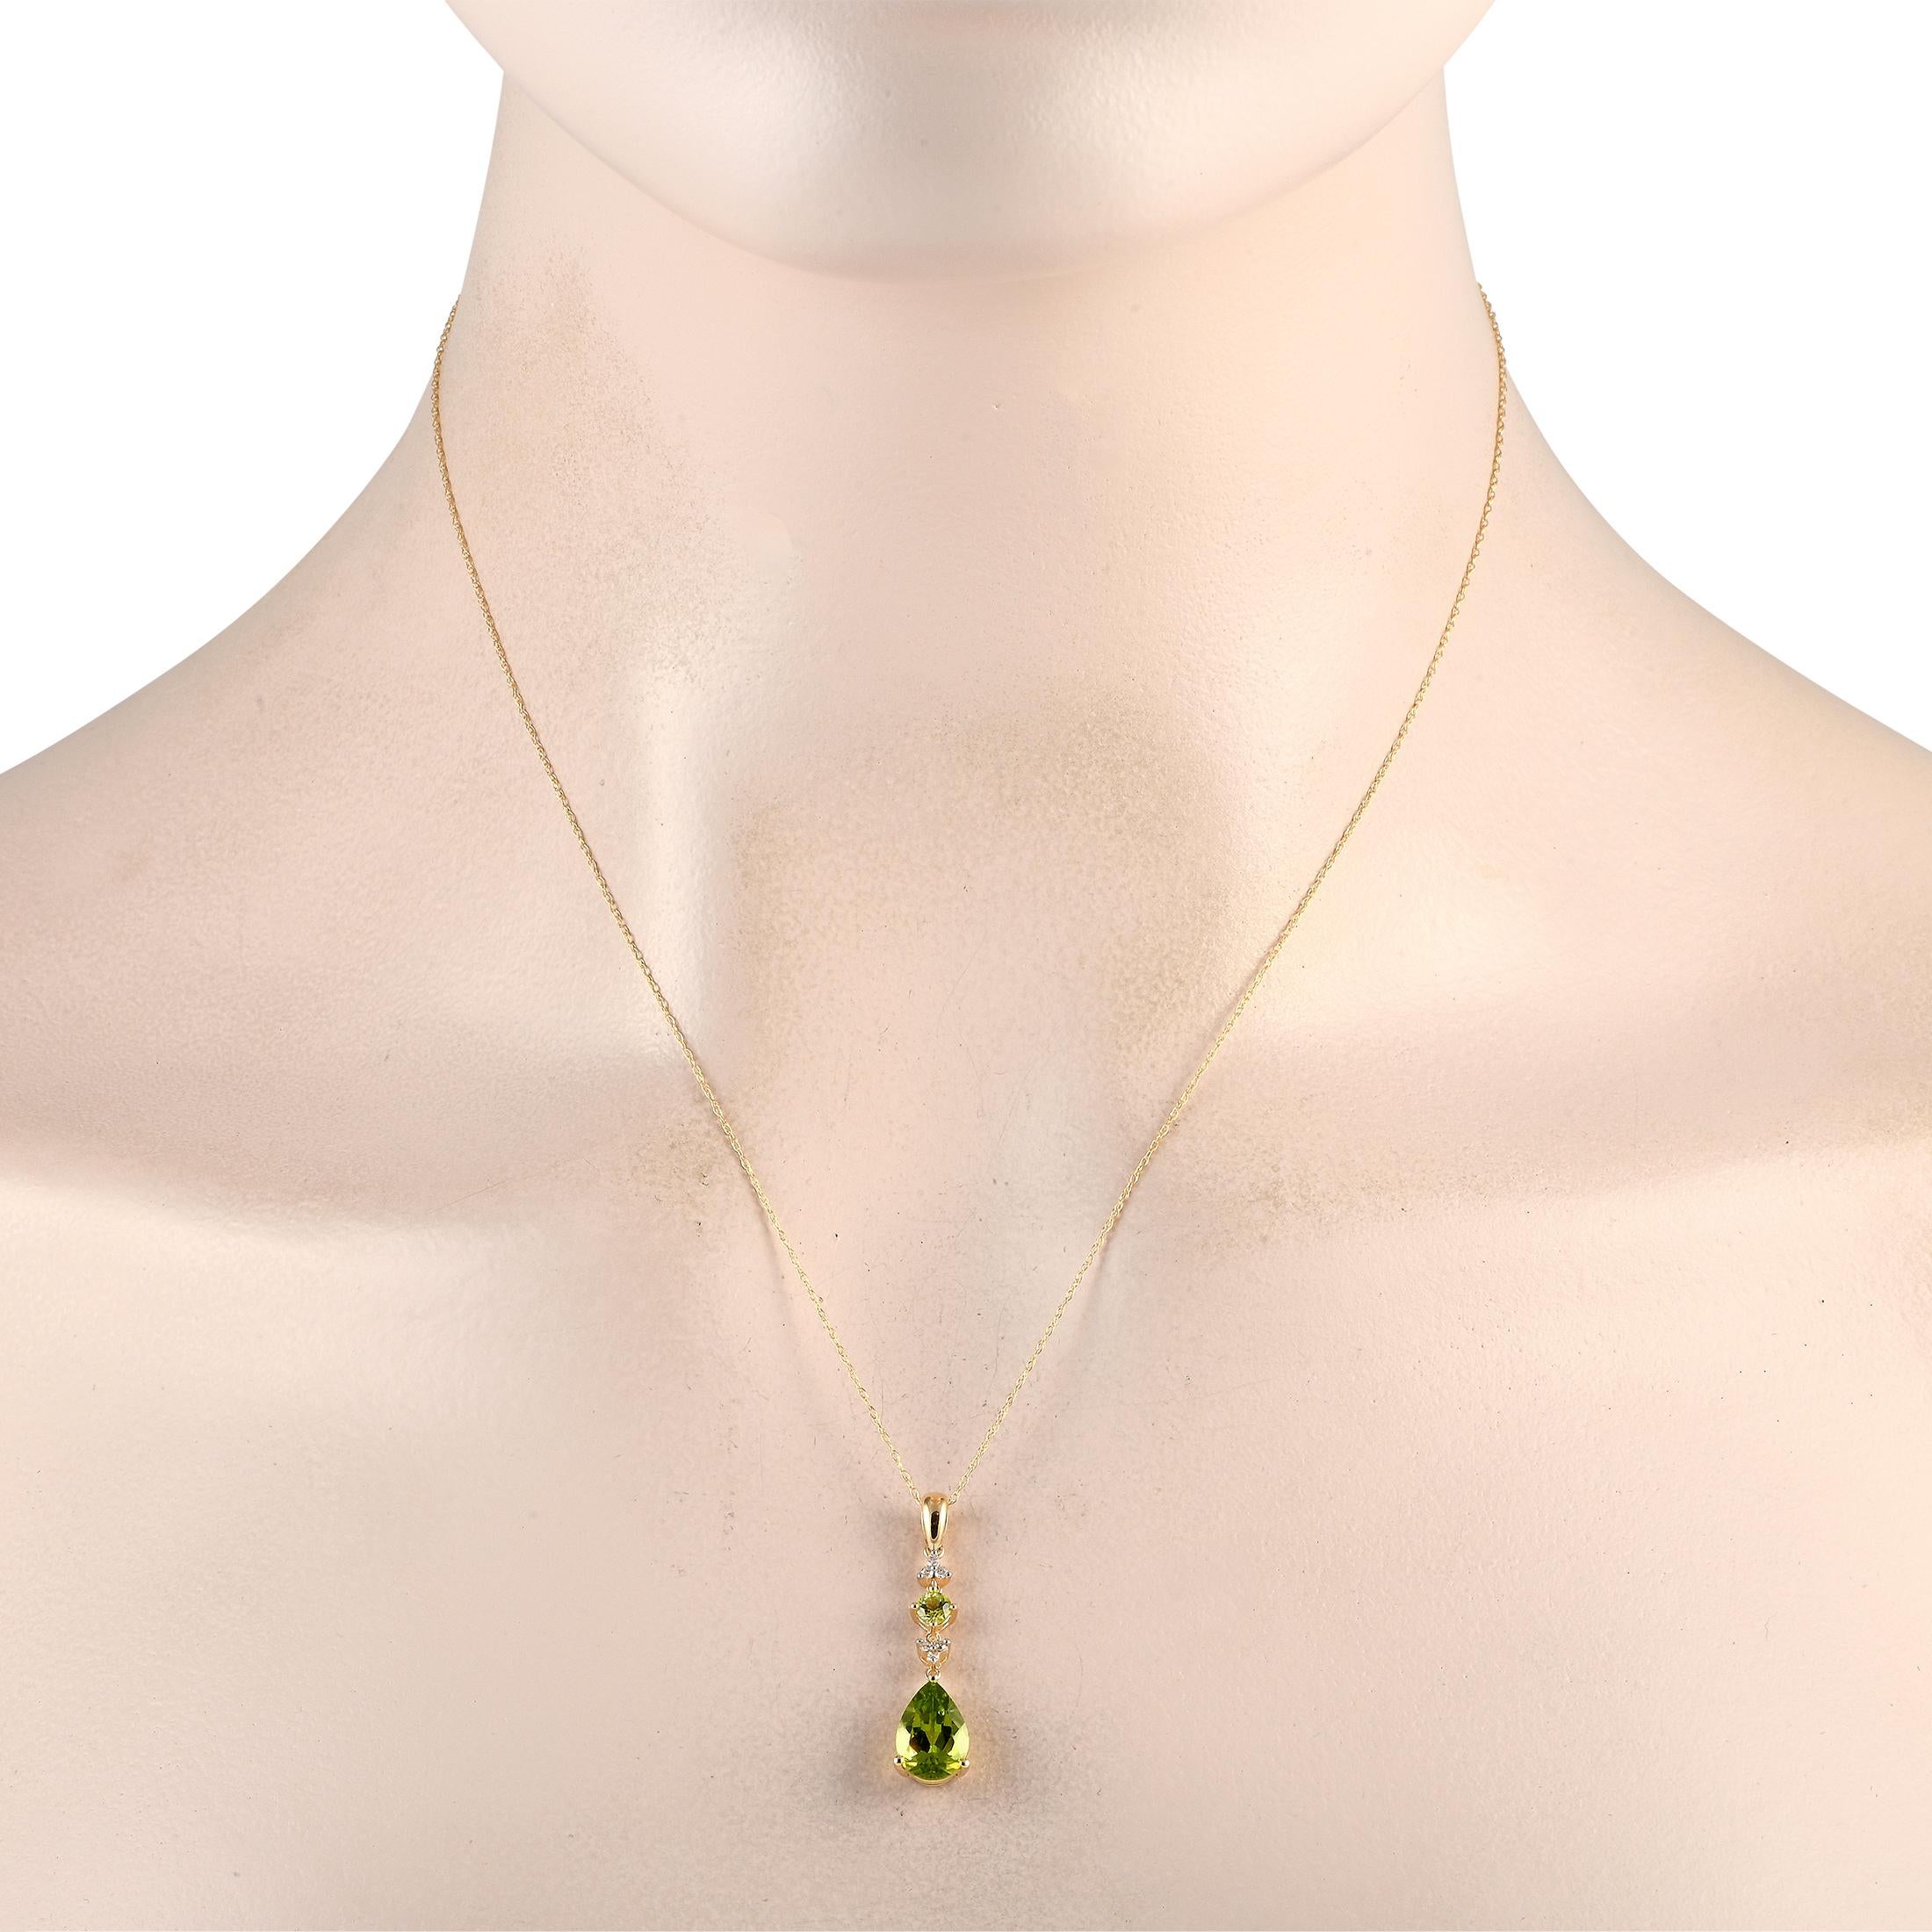 This dynamic necklace will elevate any ensemble. Bright green Peridot gemstones add a splash of color to this sophisticated accessory, while Diamonds totaling 0.05 carats provide plenty of extra sparkle. The 14K Yellow Gold pendant measures 1.25